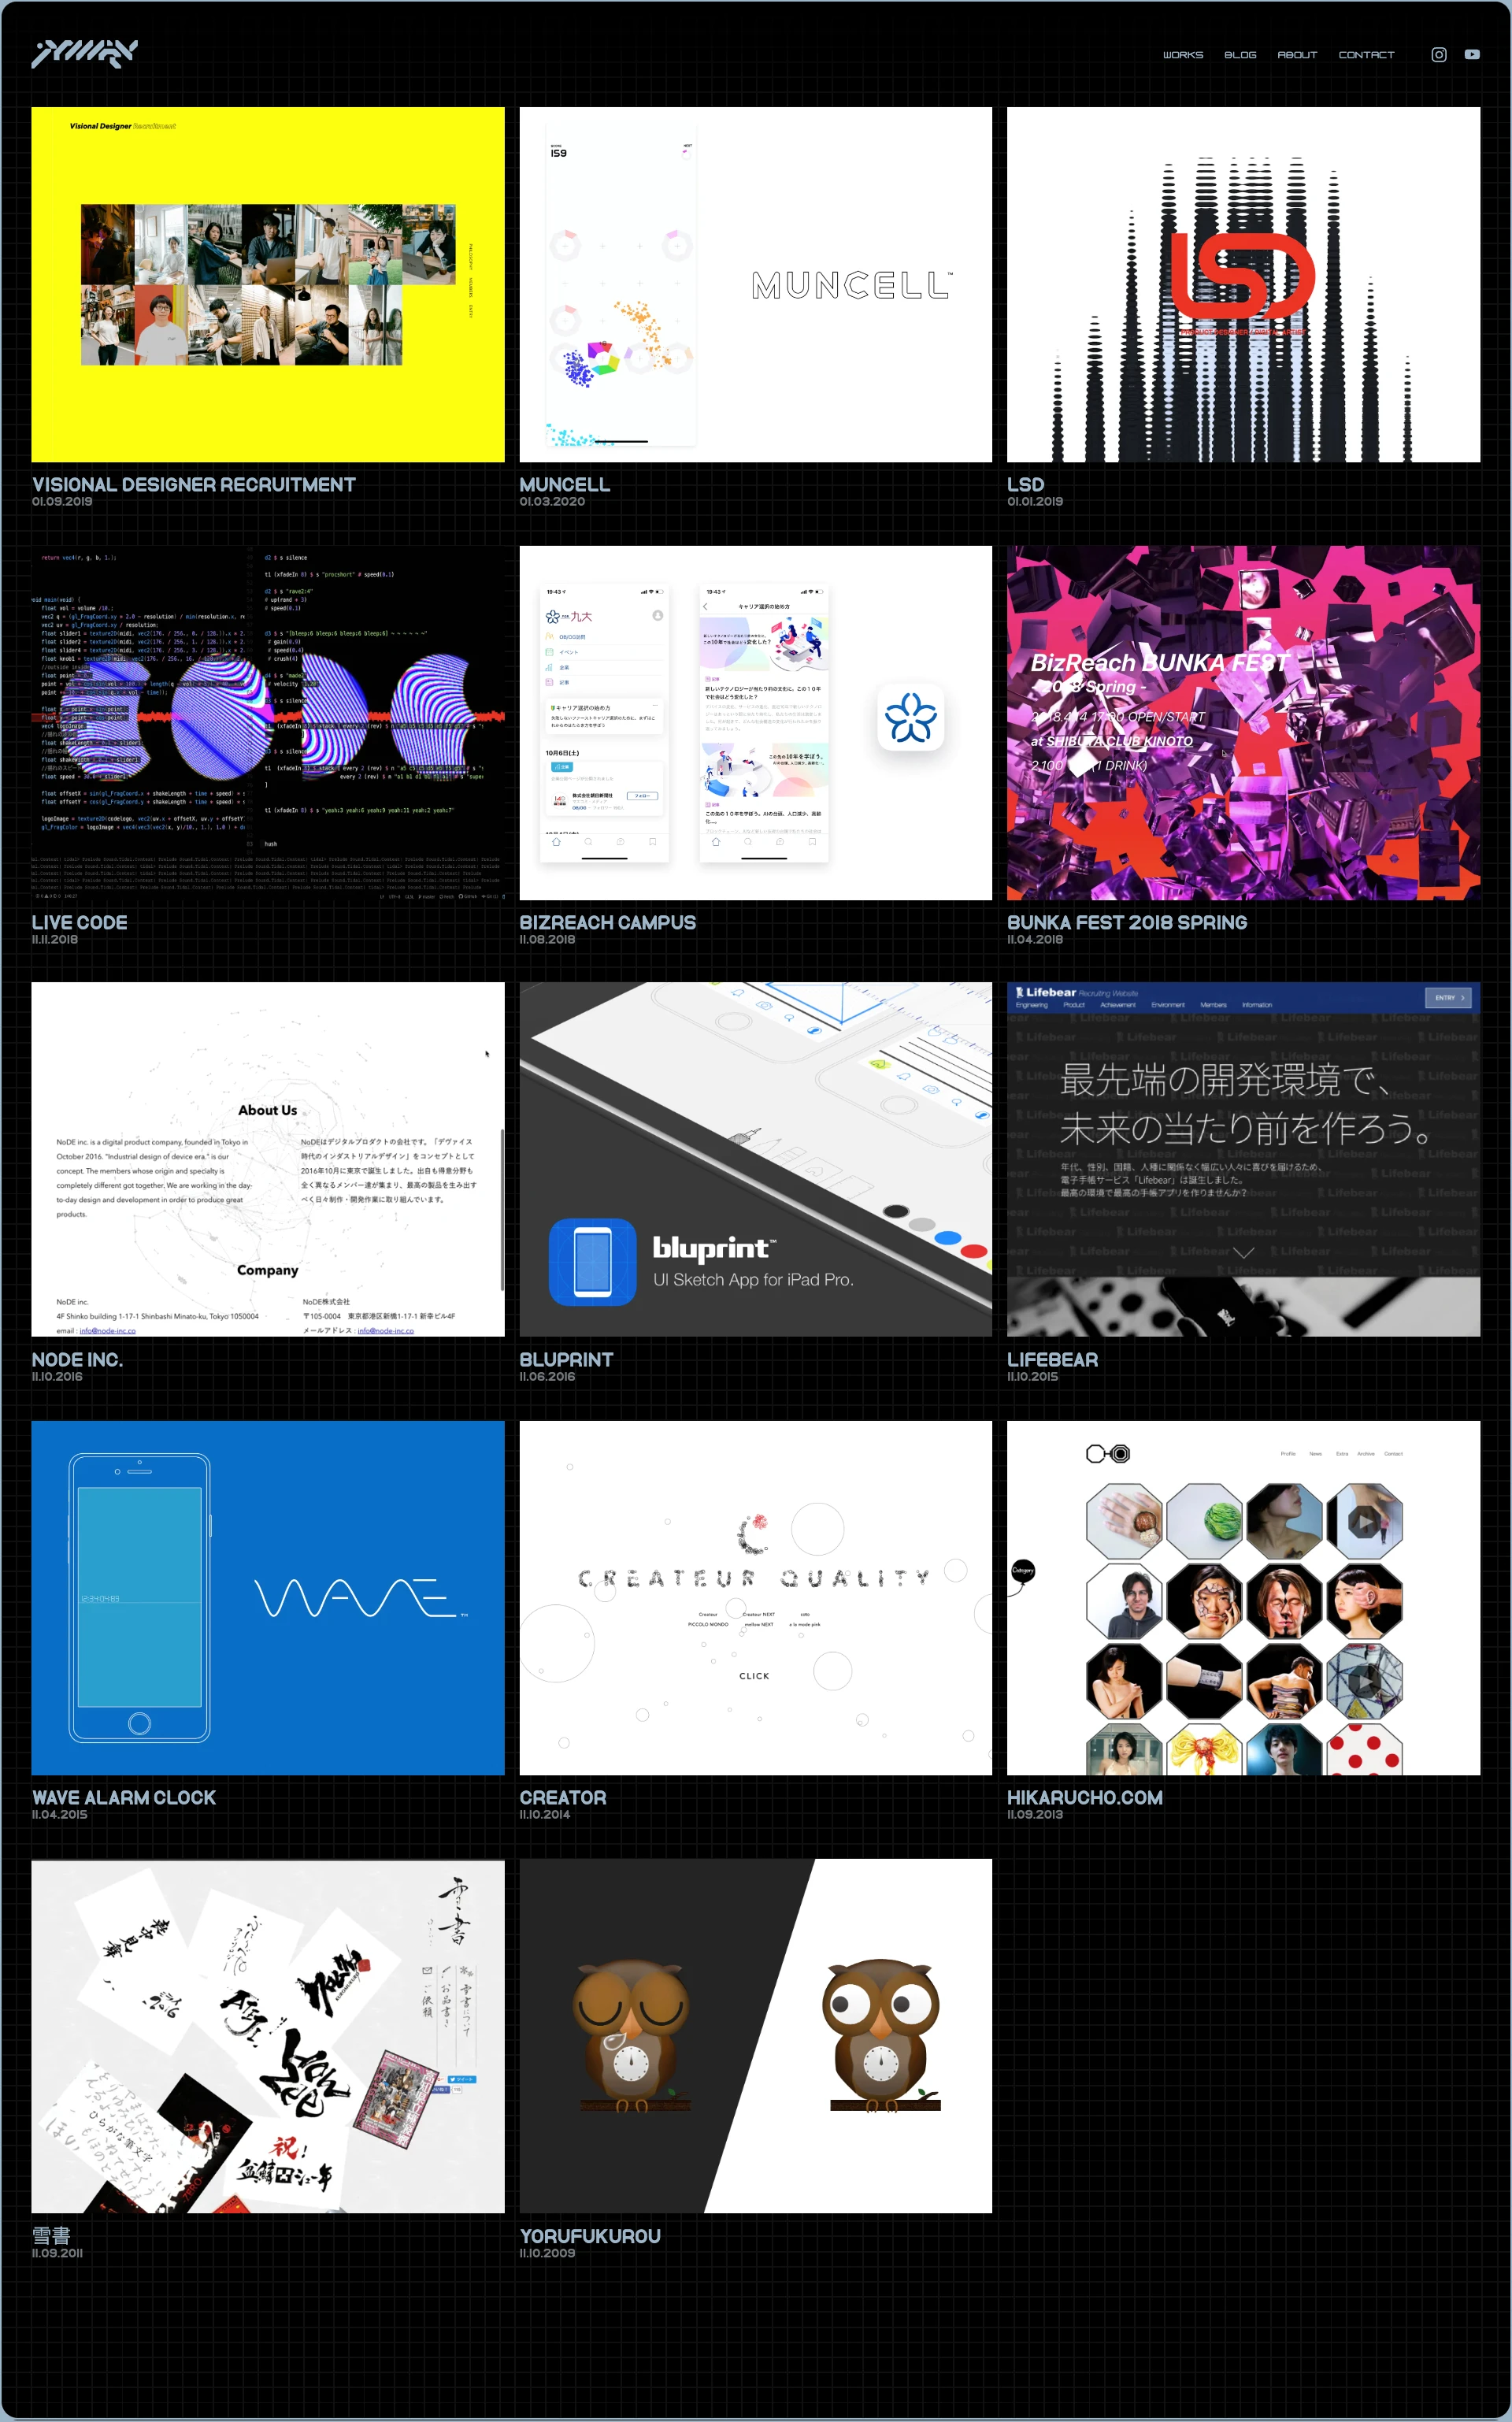 prmtv Landing Page Example: A Designer and Creator based in Tokyo, Japan.